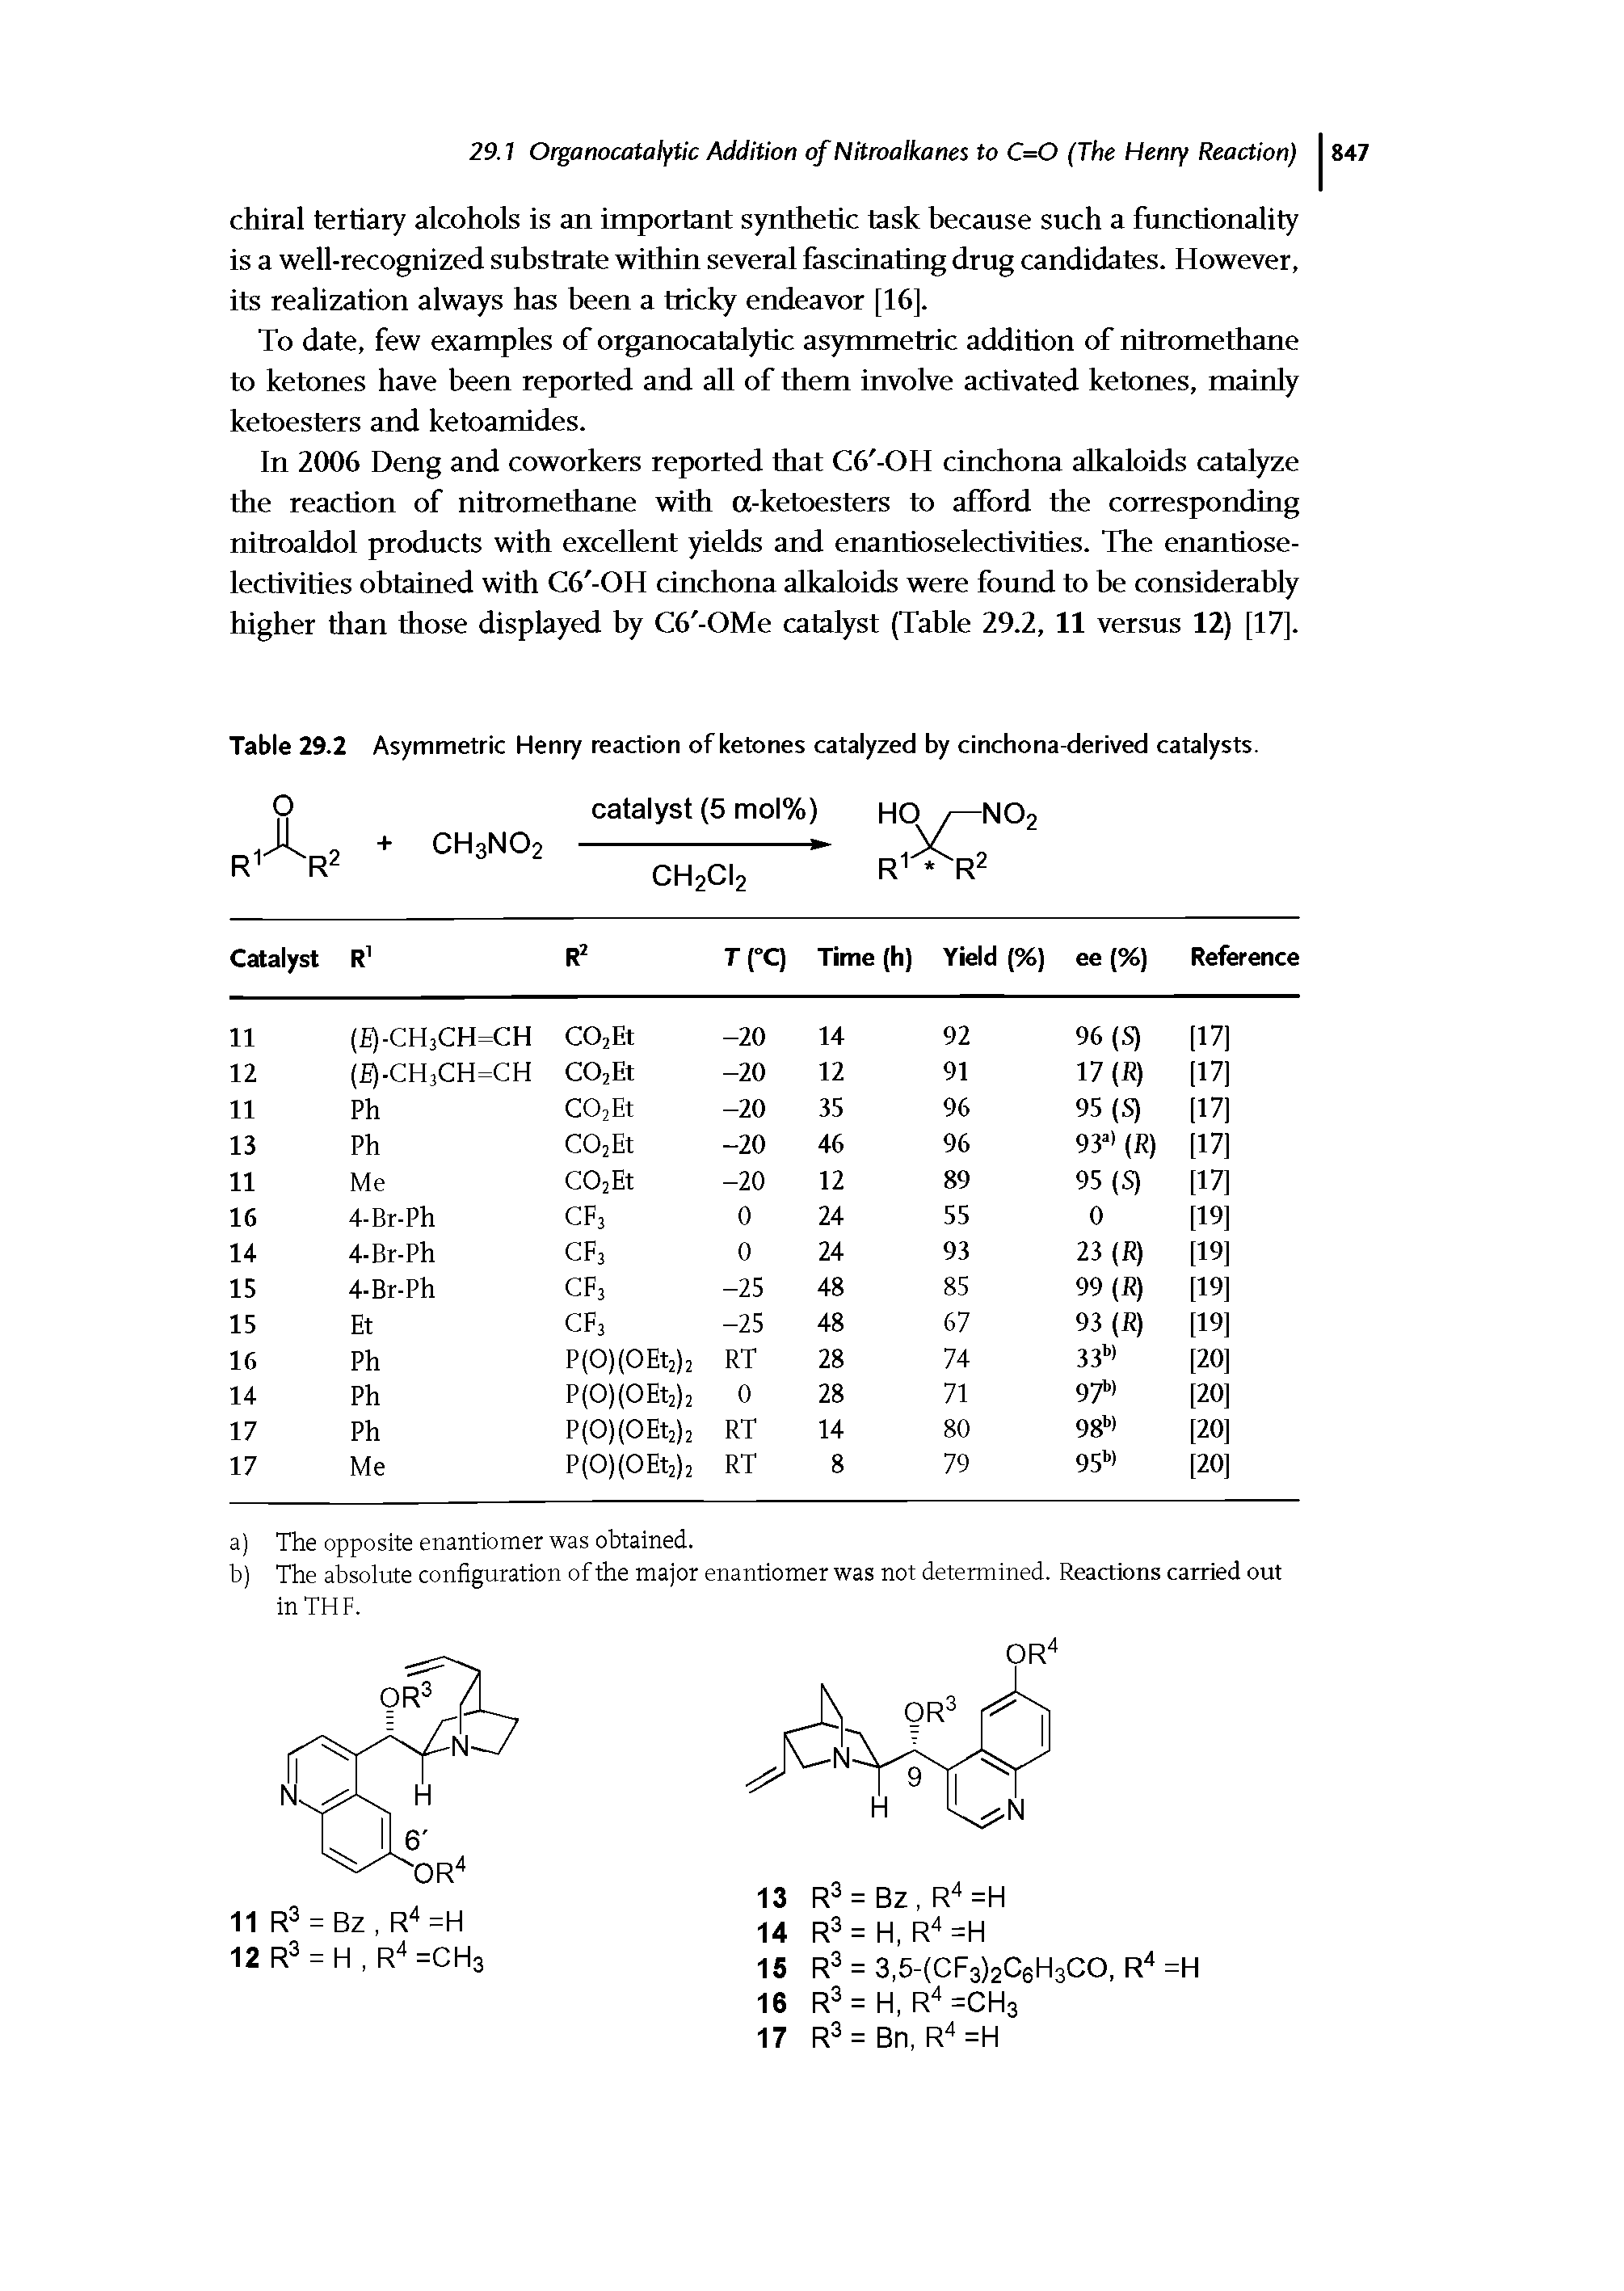 Table 29.2 Asymmetric Henry reaction of ketones catalyzed by cinchona-derived catalysts.